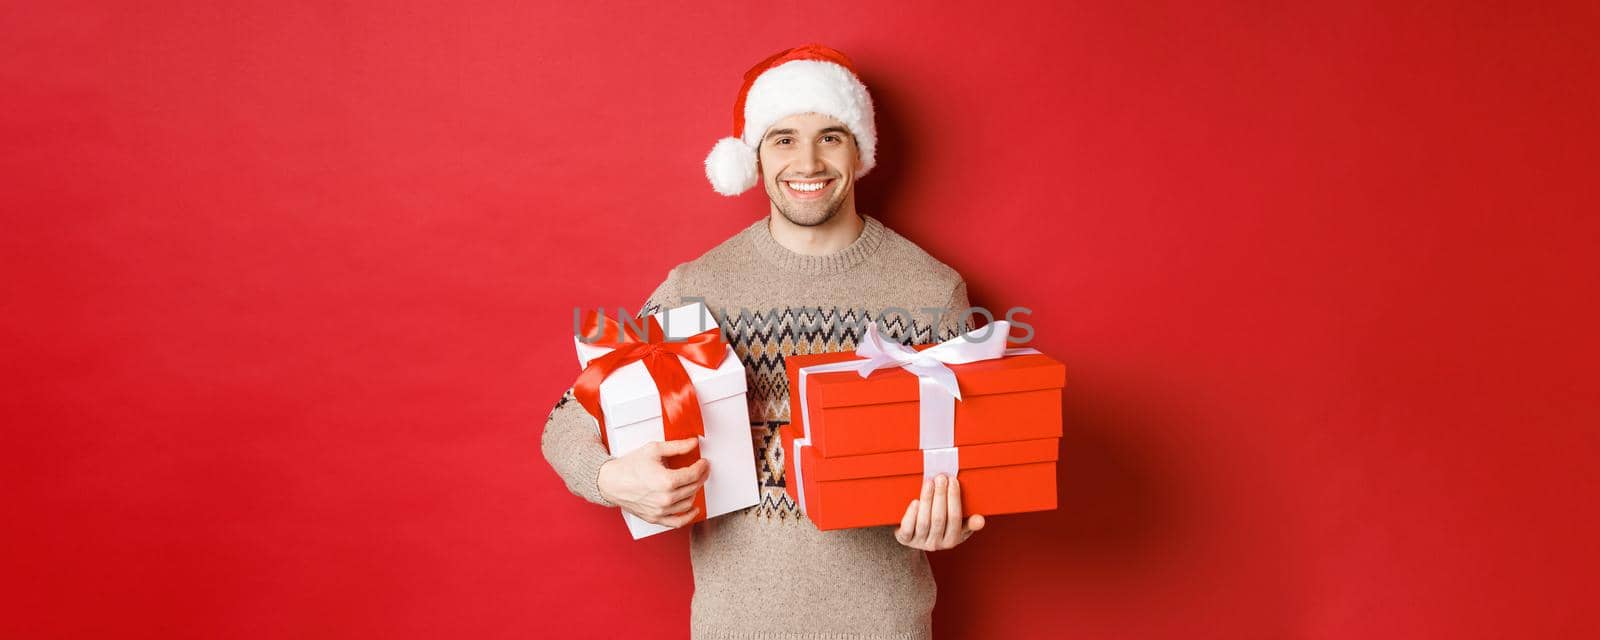 Concept of winter holidays, new year and celebration. Portrait of handsome man in santa hat and sweater, holding boxes with christmas presents and smiling, prepared gifts, red background.